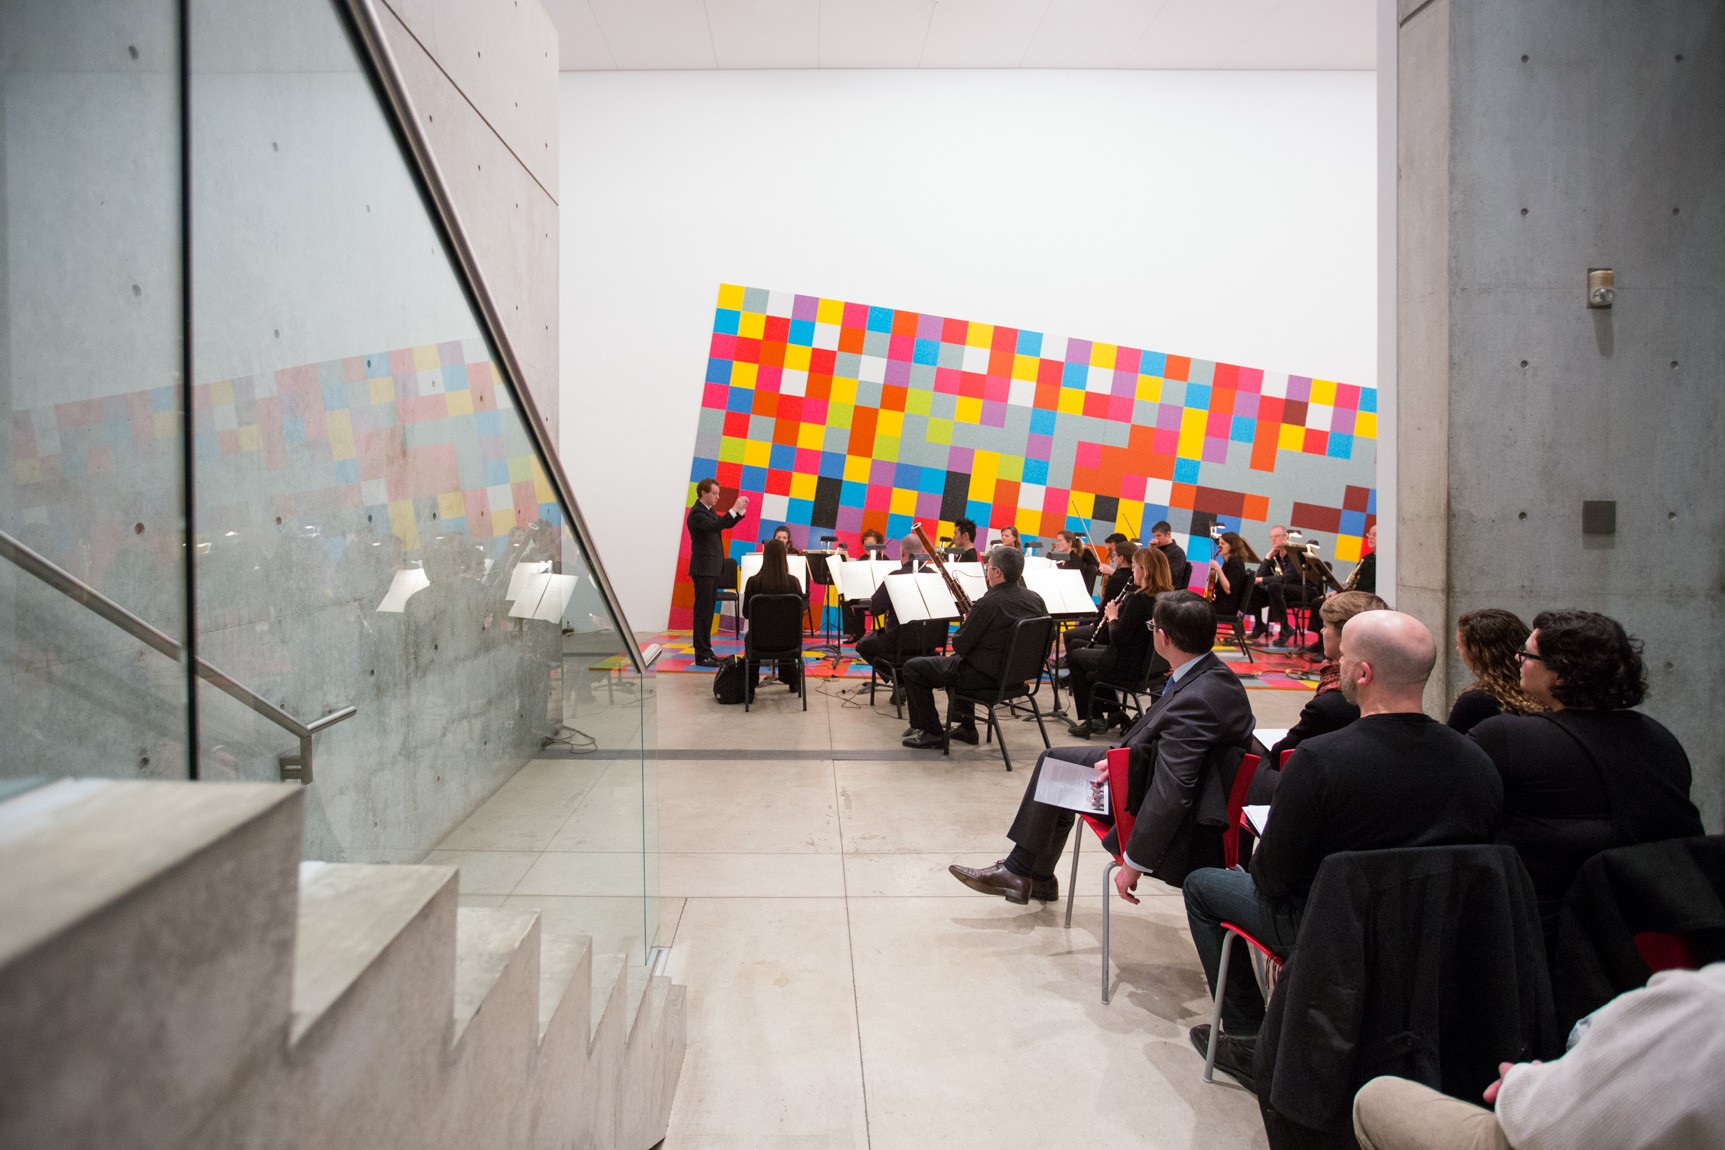 Audience members sit in front of the Water Court doors to watch the performance in the Main Gallery.